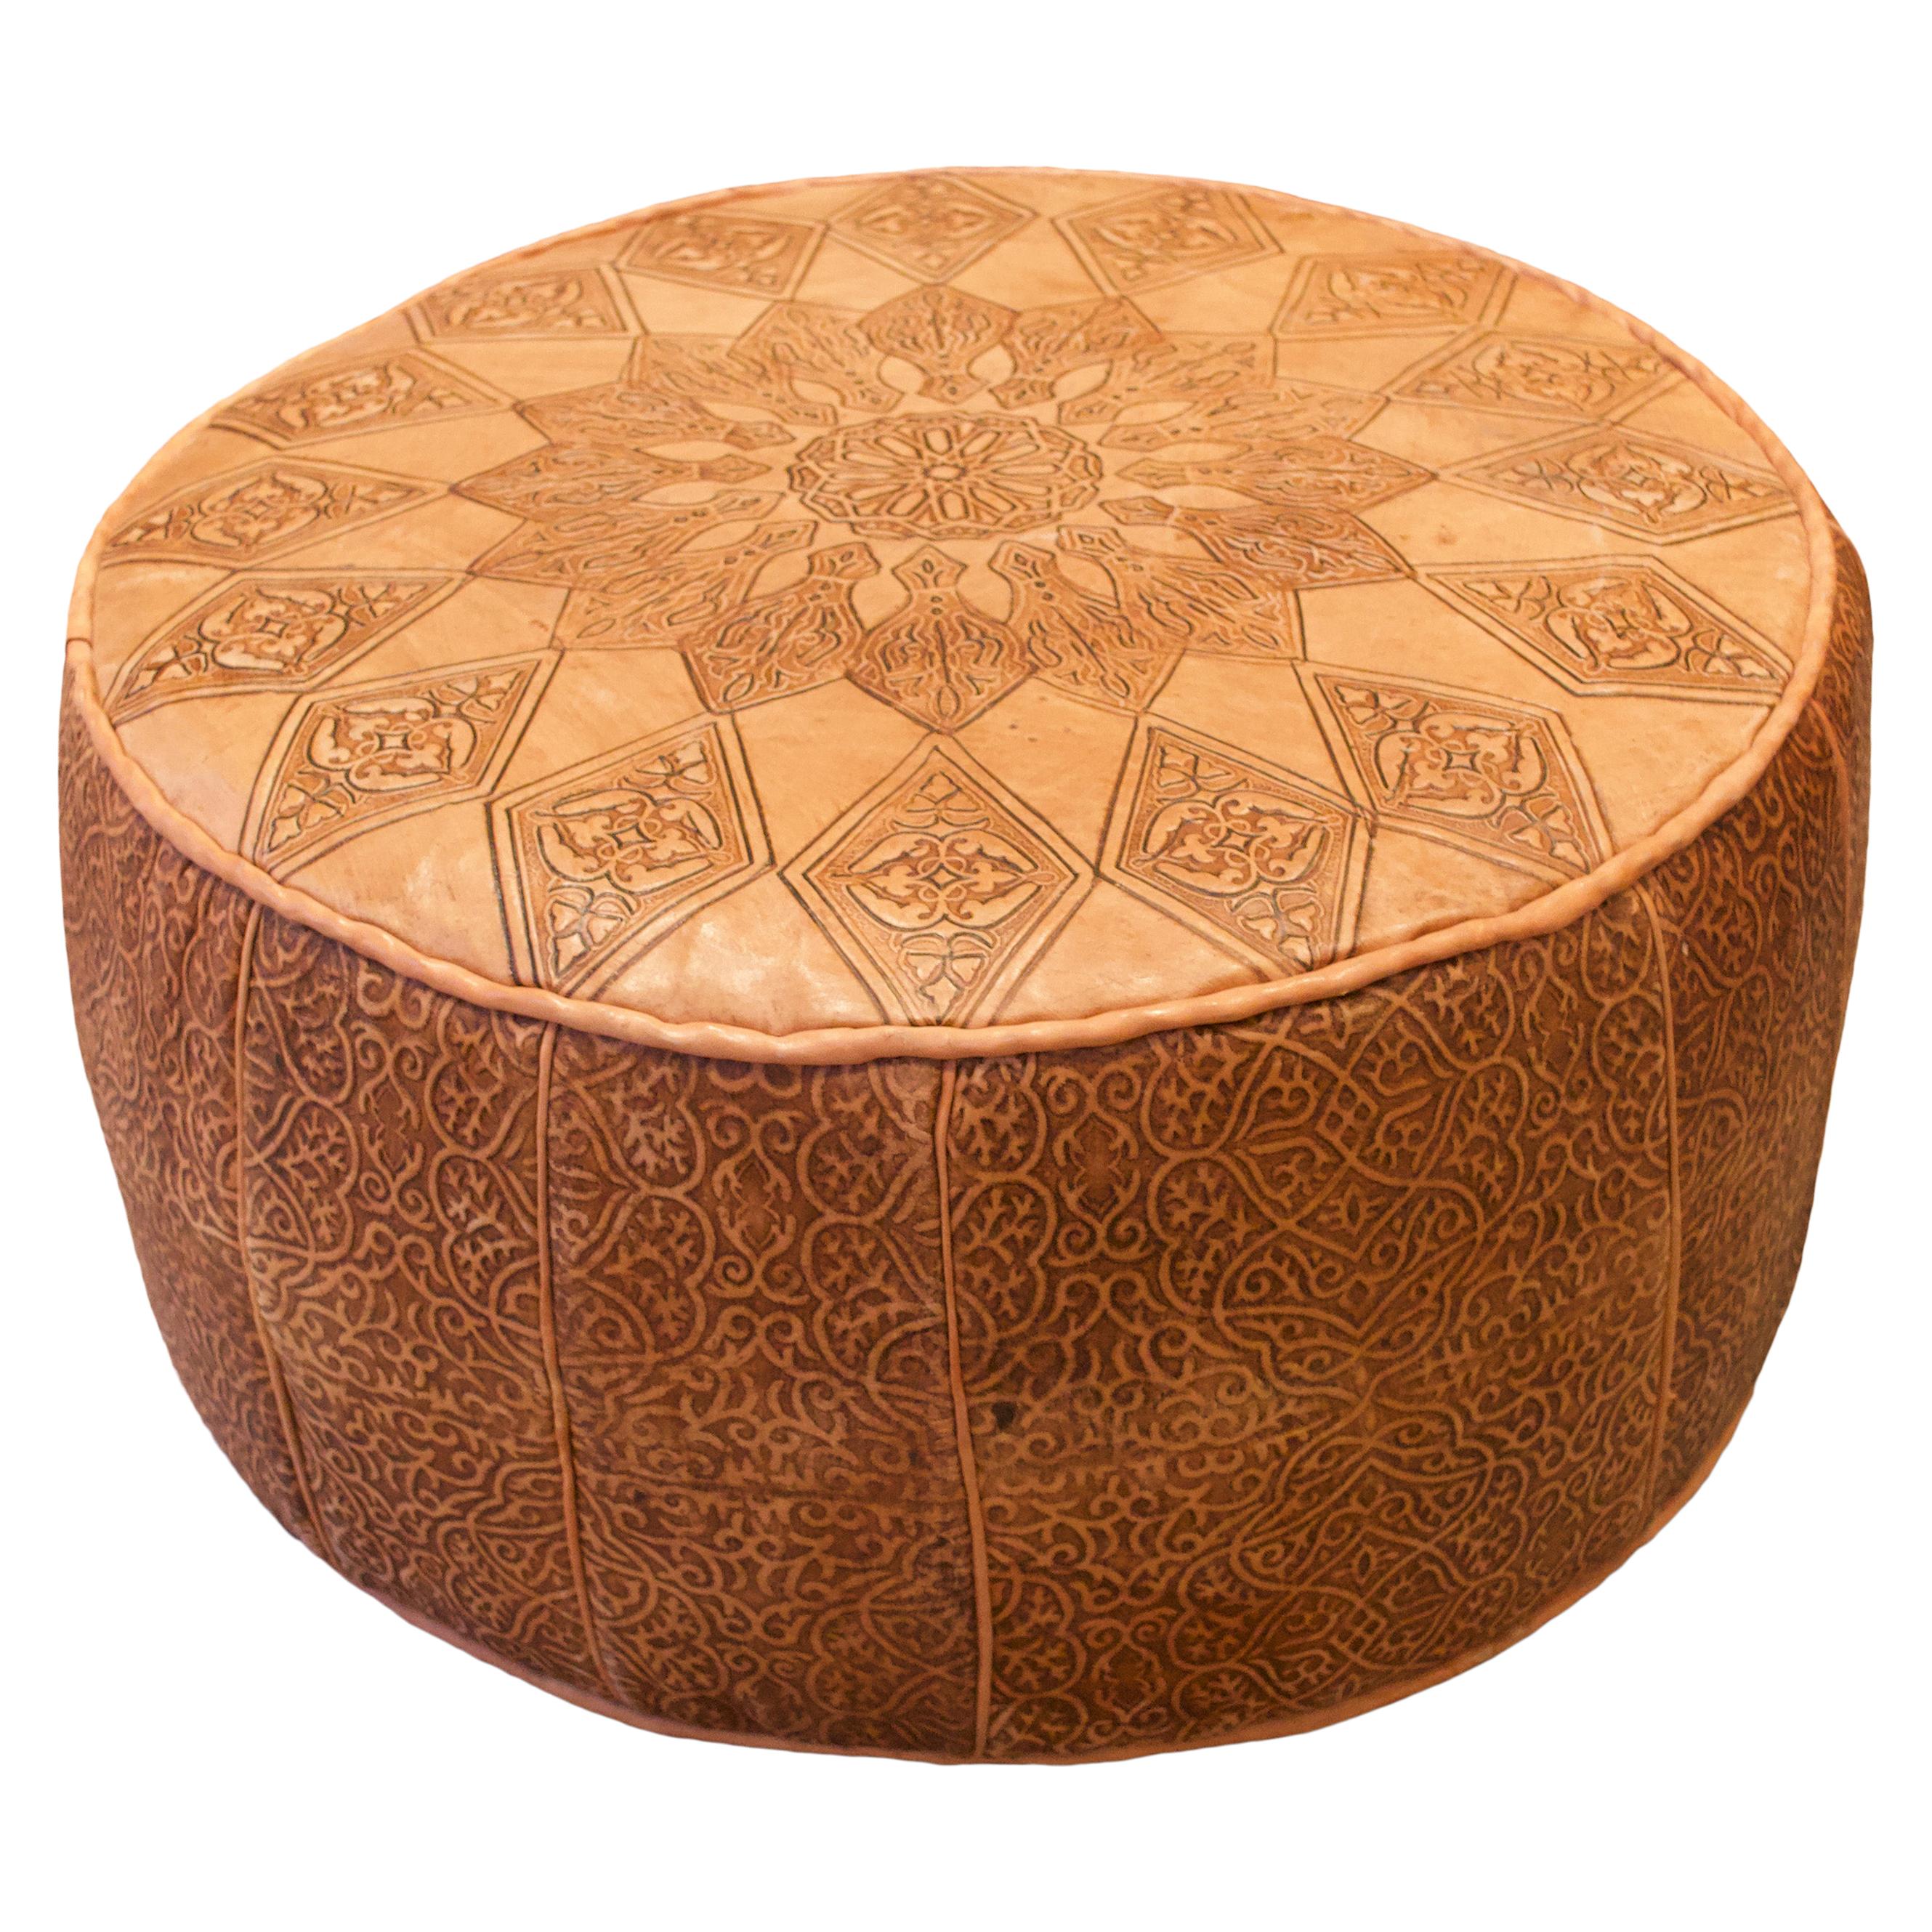 Engraved Leather Moroccan Pouf